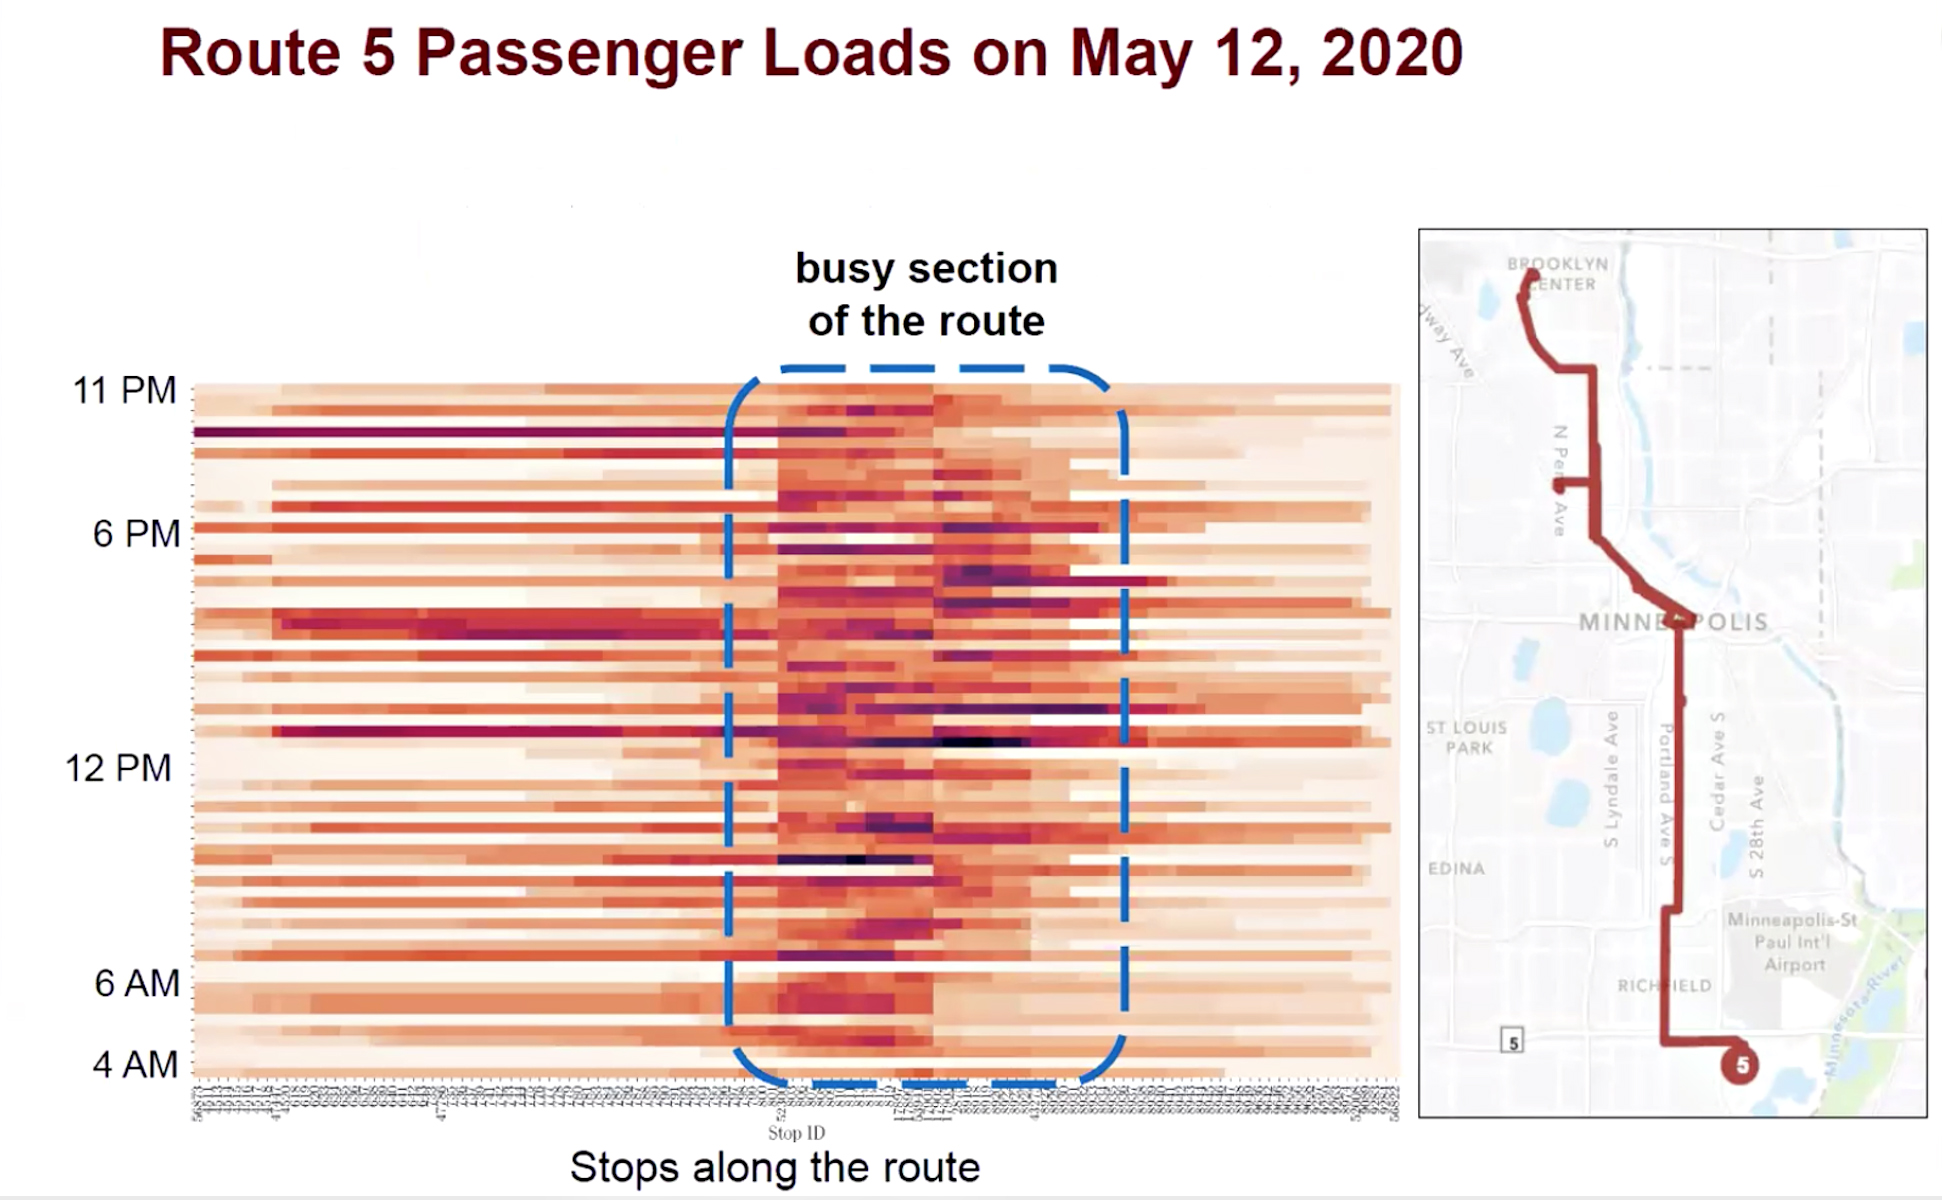 A heat map diagram of route 5 passenger loads on May 12, 2020